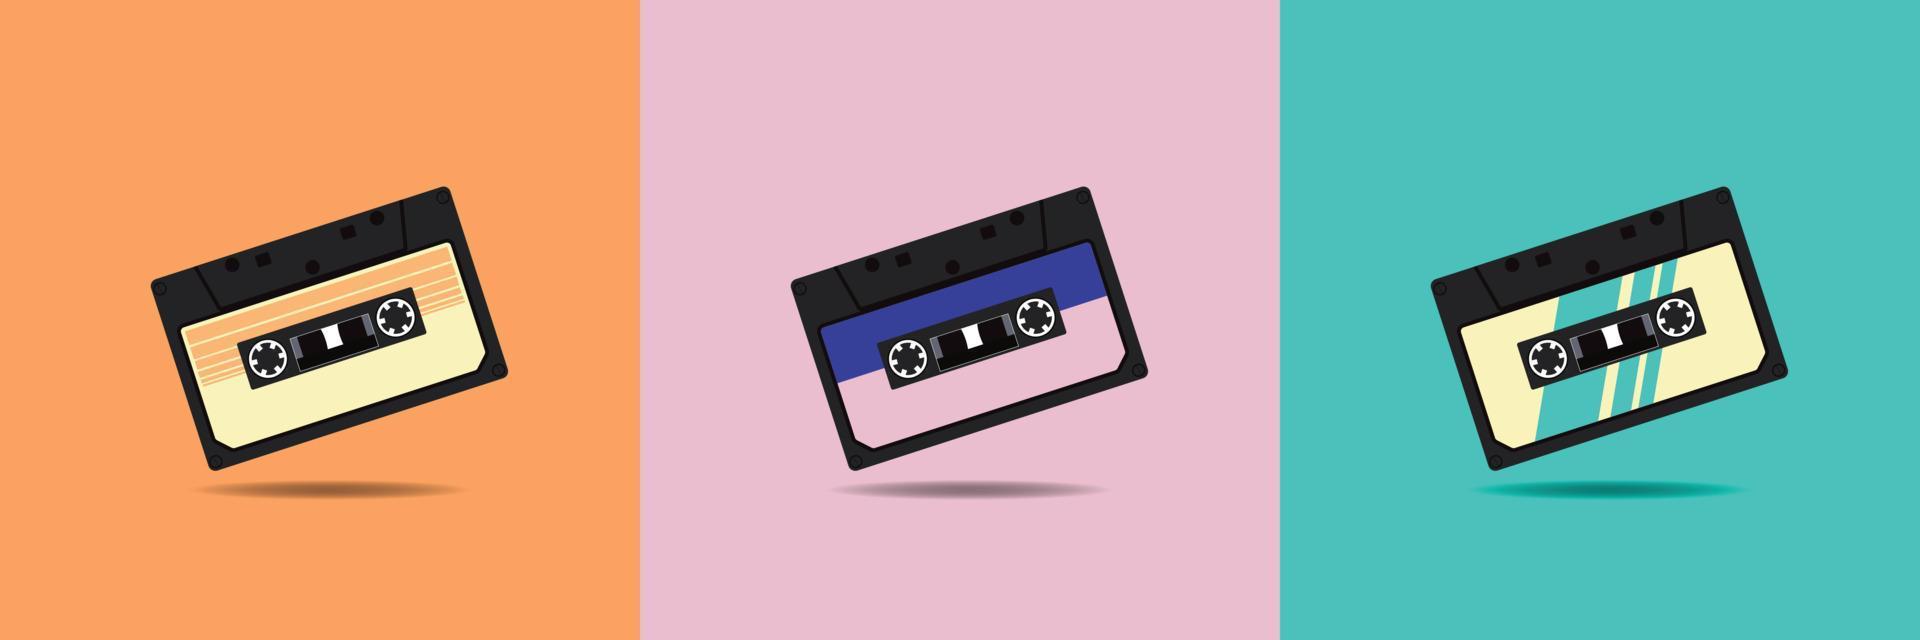 Single Audio Cassette Tape with a Variety of Classic Colors. Old Fashioned Analog Mixtape. Vector Illustration Wallpaper.